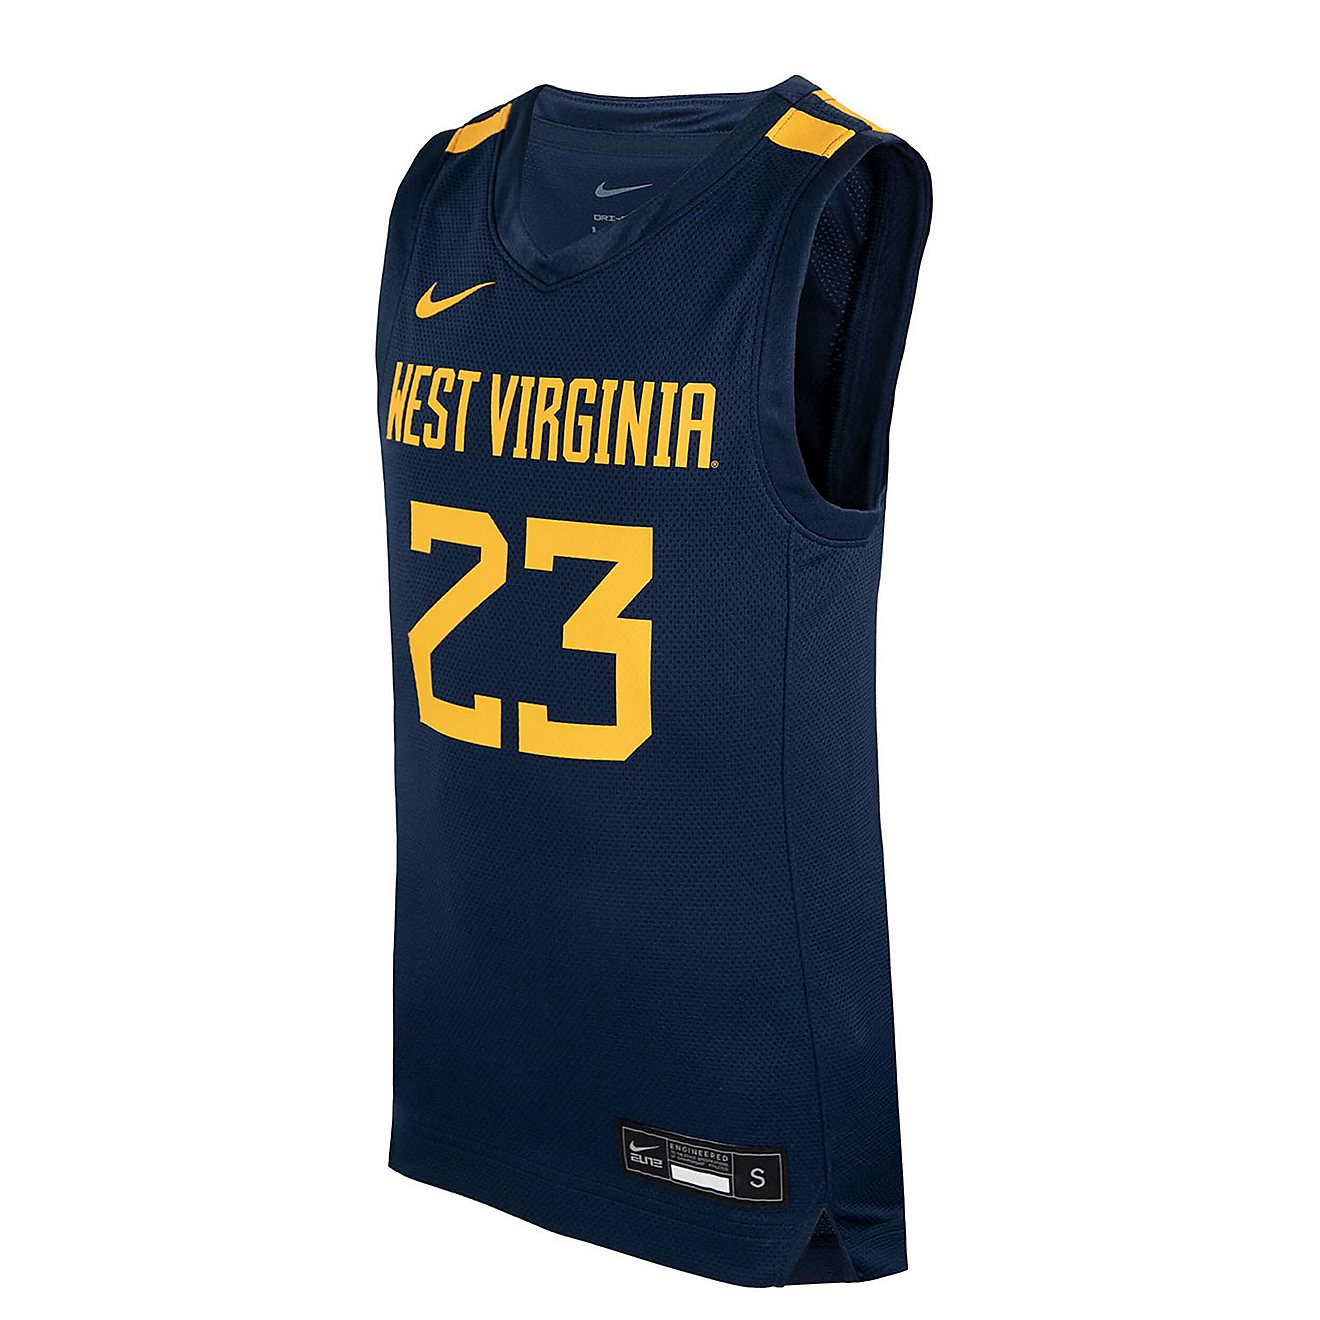 Youth Nike 23 West Virginia Mountaineers Icon Replica Basketball Jersey                                                          - view number 2